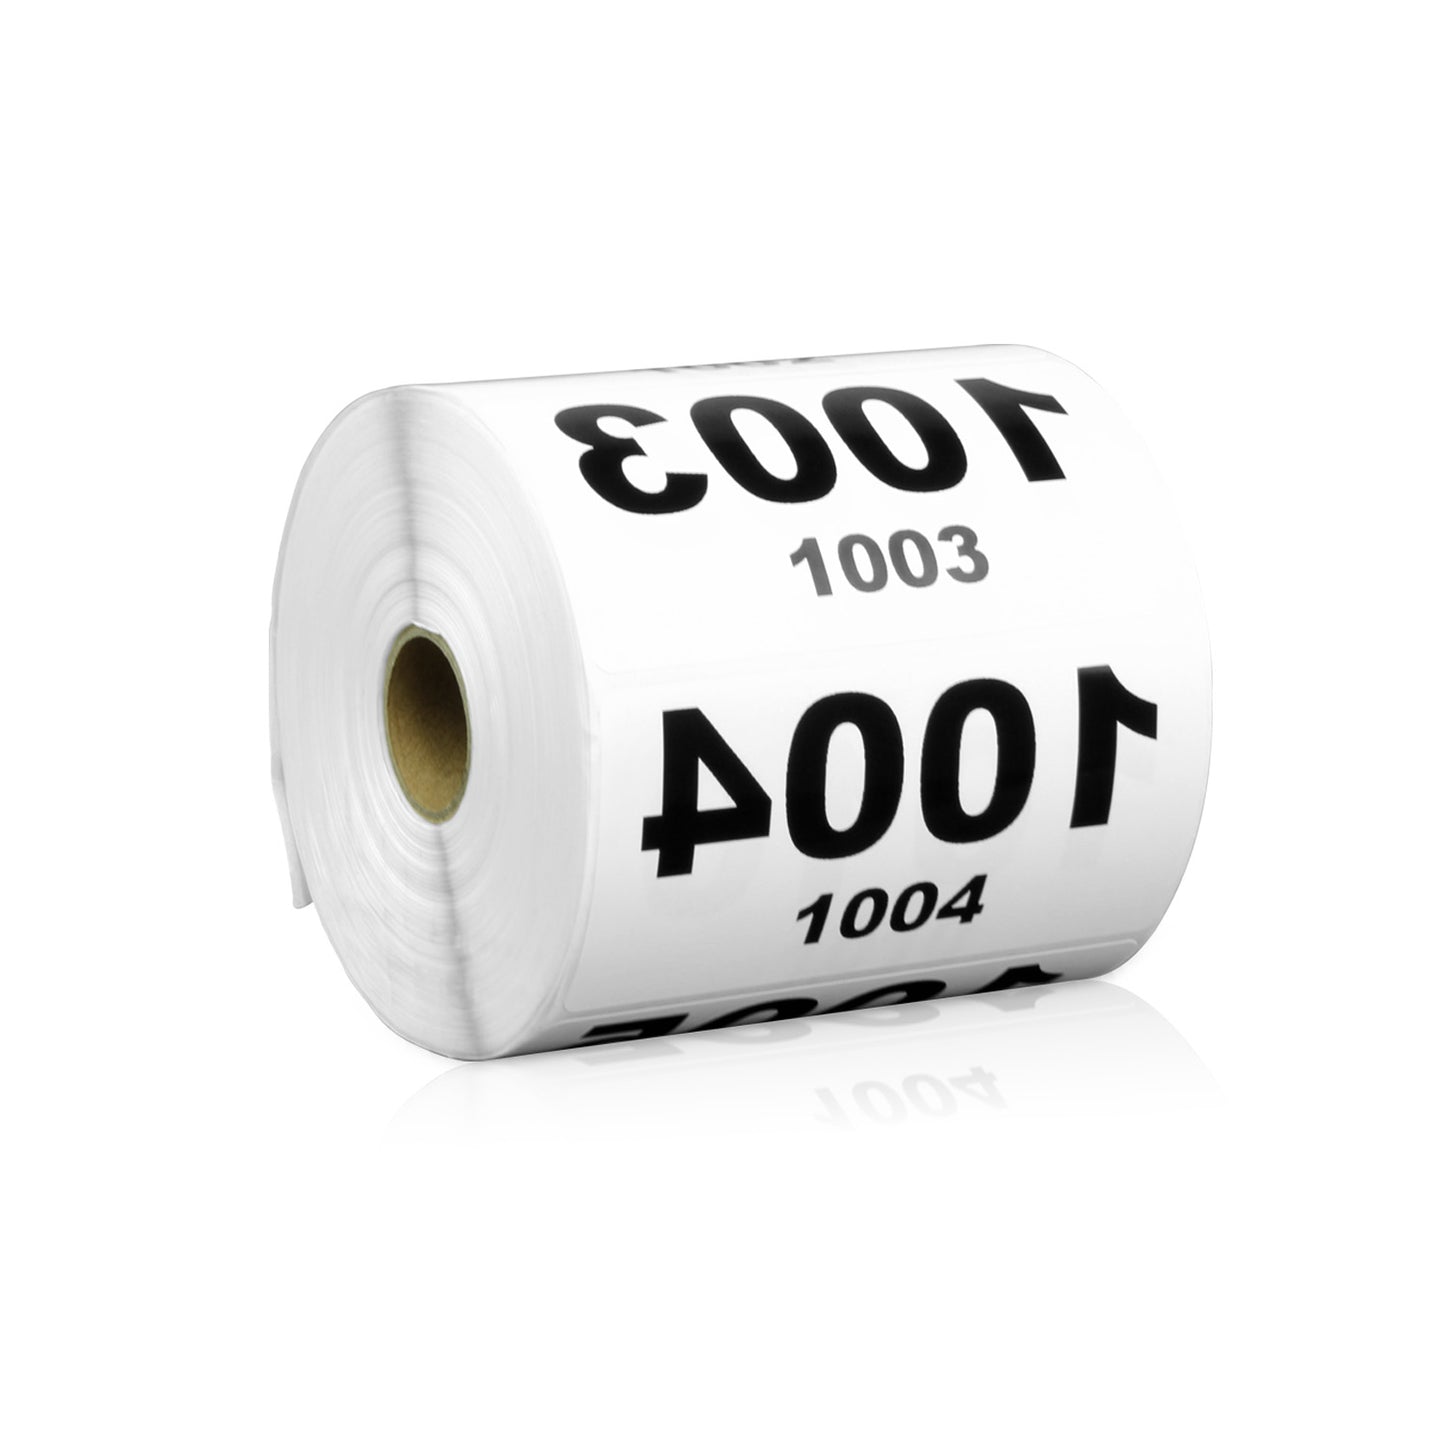 4 x 2 inch | Inventory: Reverse Numbered "1001-2000" Consecutive Numbers Stickers